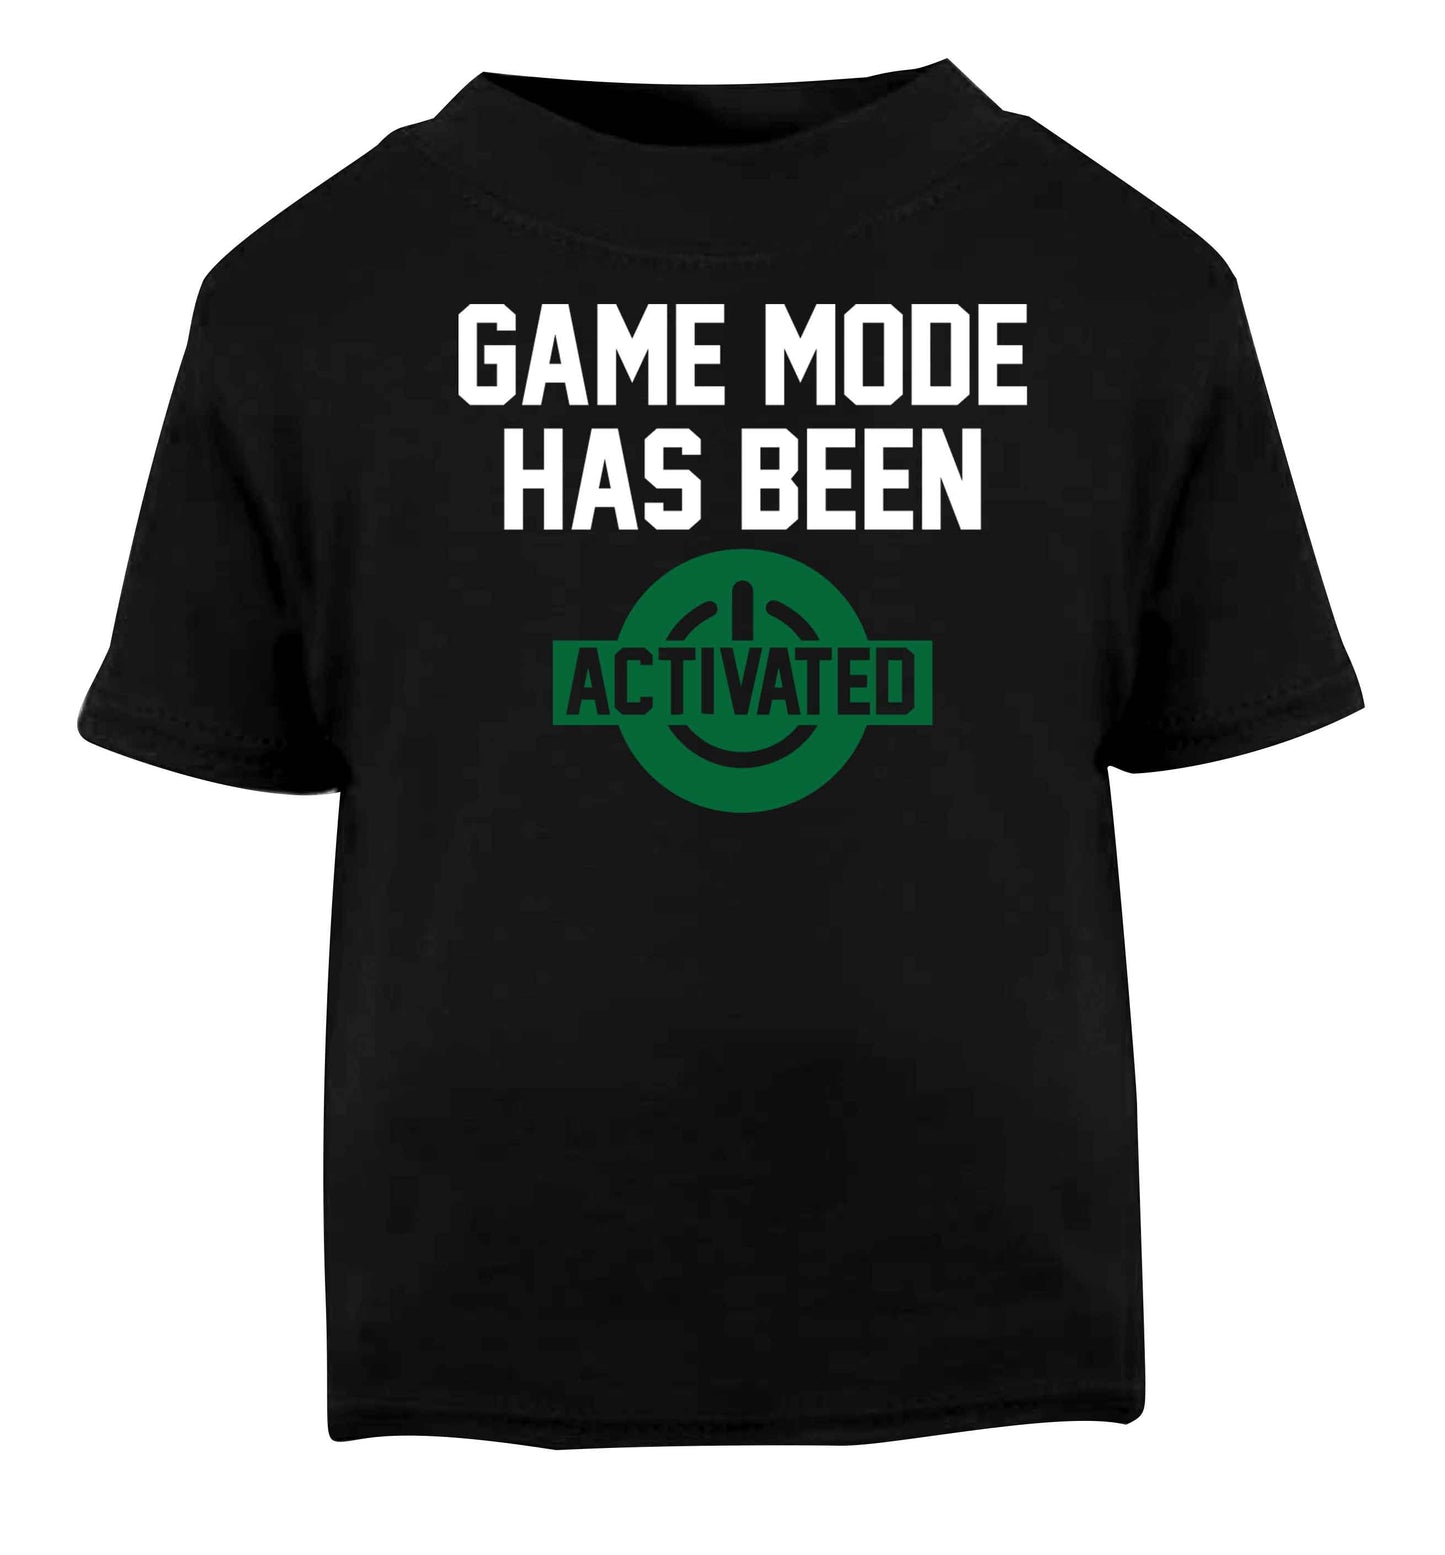 Game mode has been activated Black baby toddler Tshirt 2 years